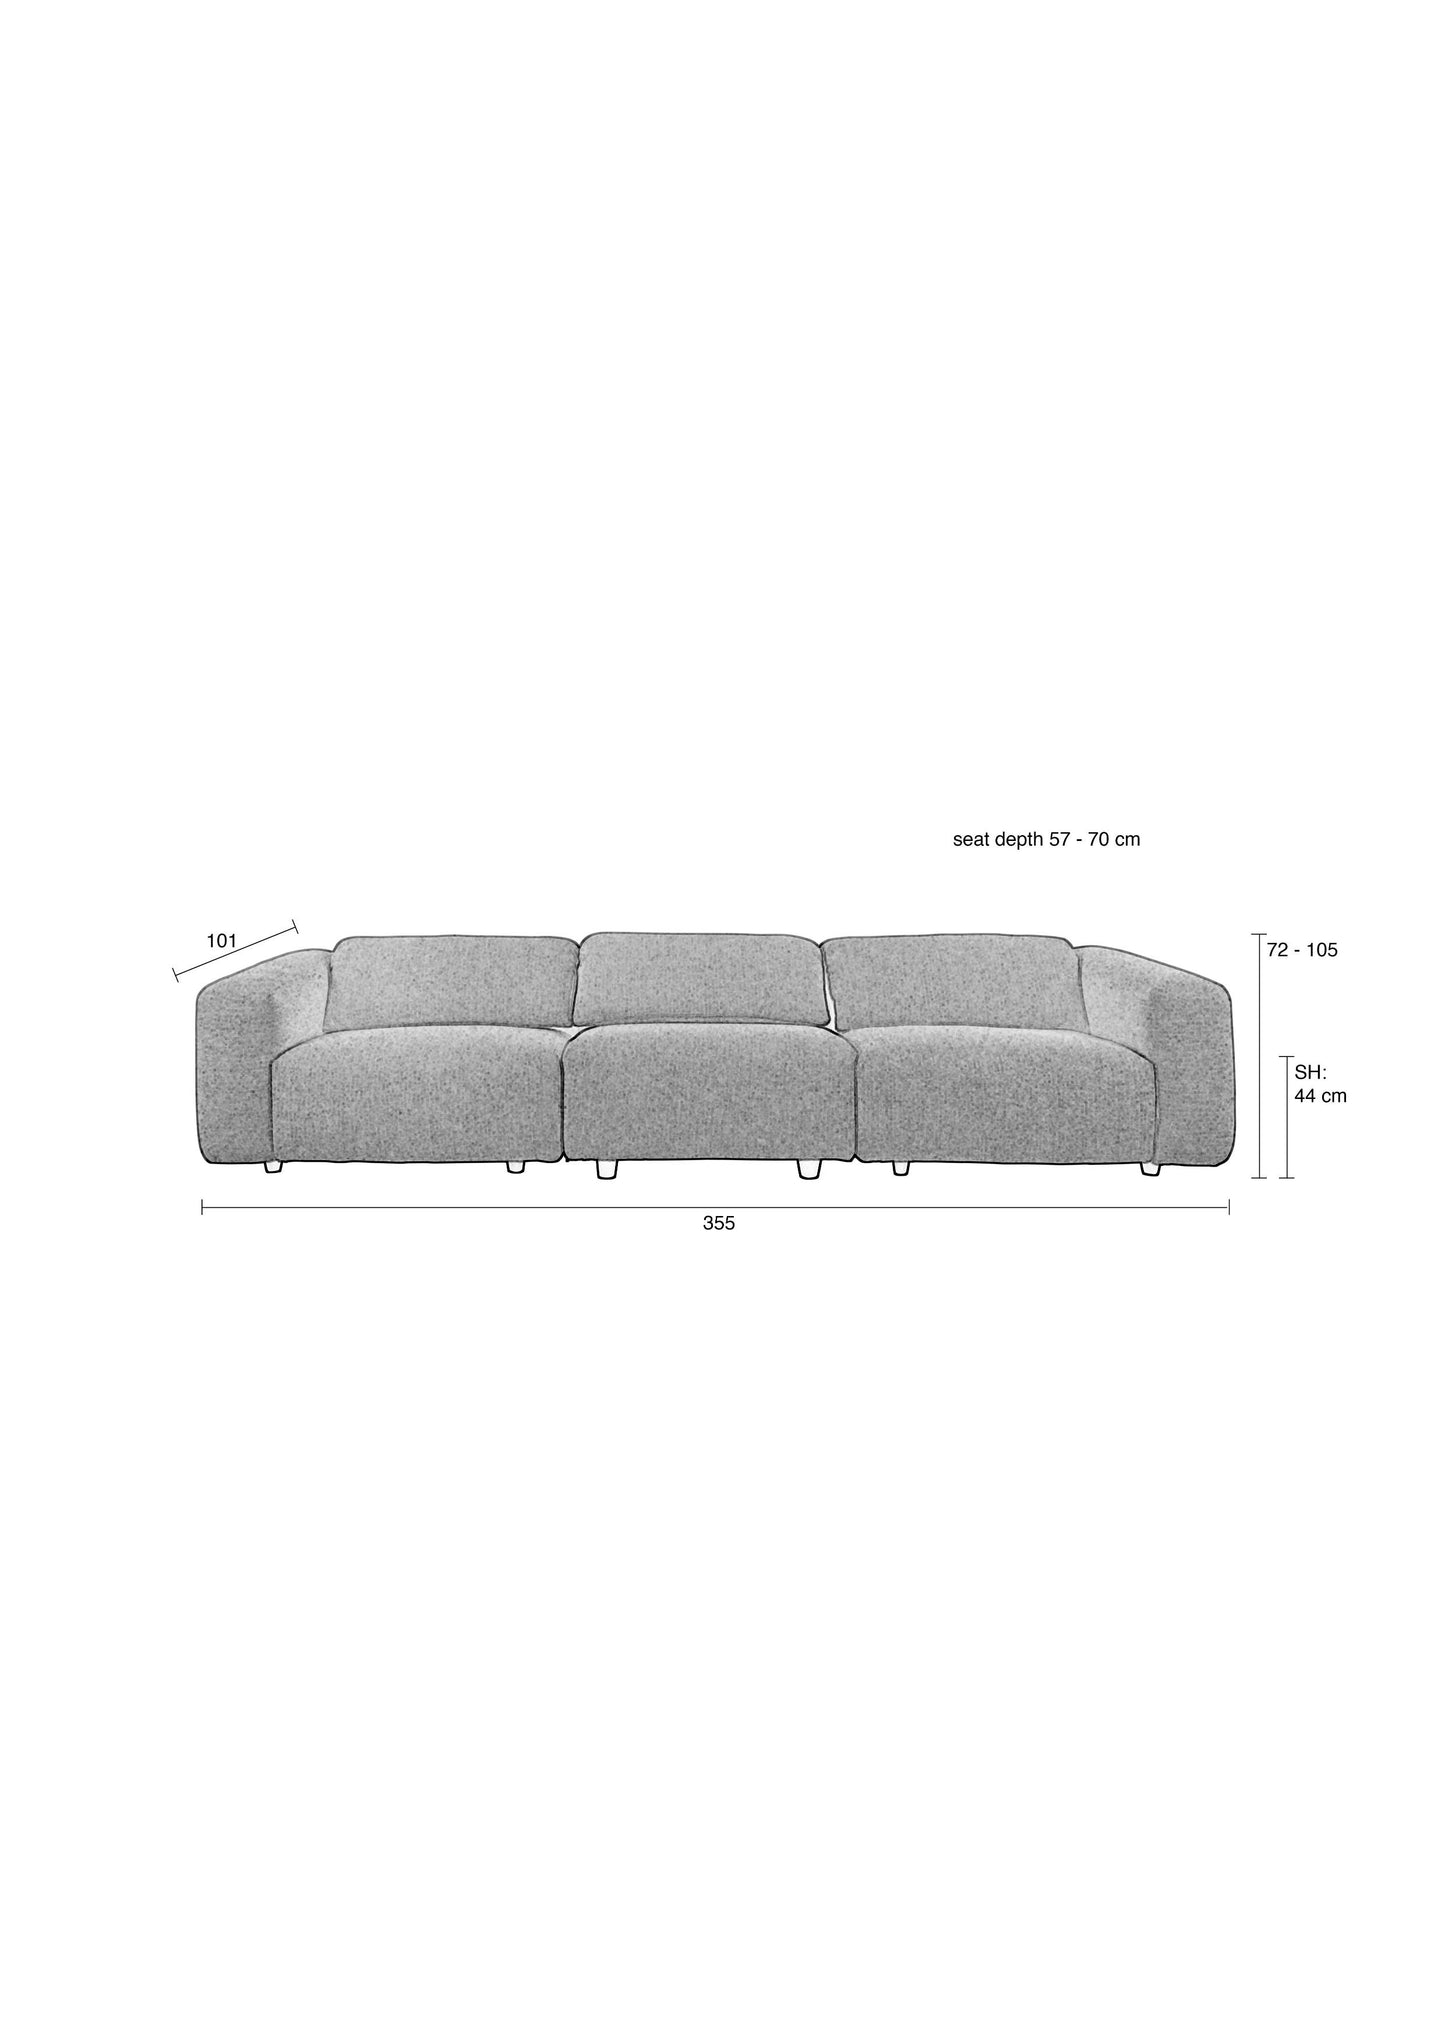 Zuiver | SOFA WINGS 4,5-SEATER NATURAL Default Title